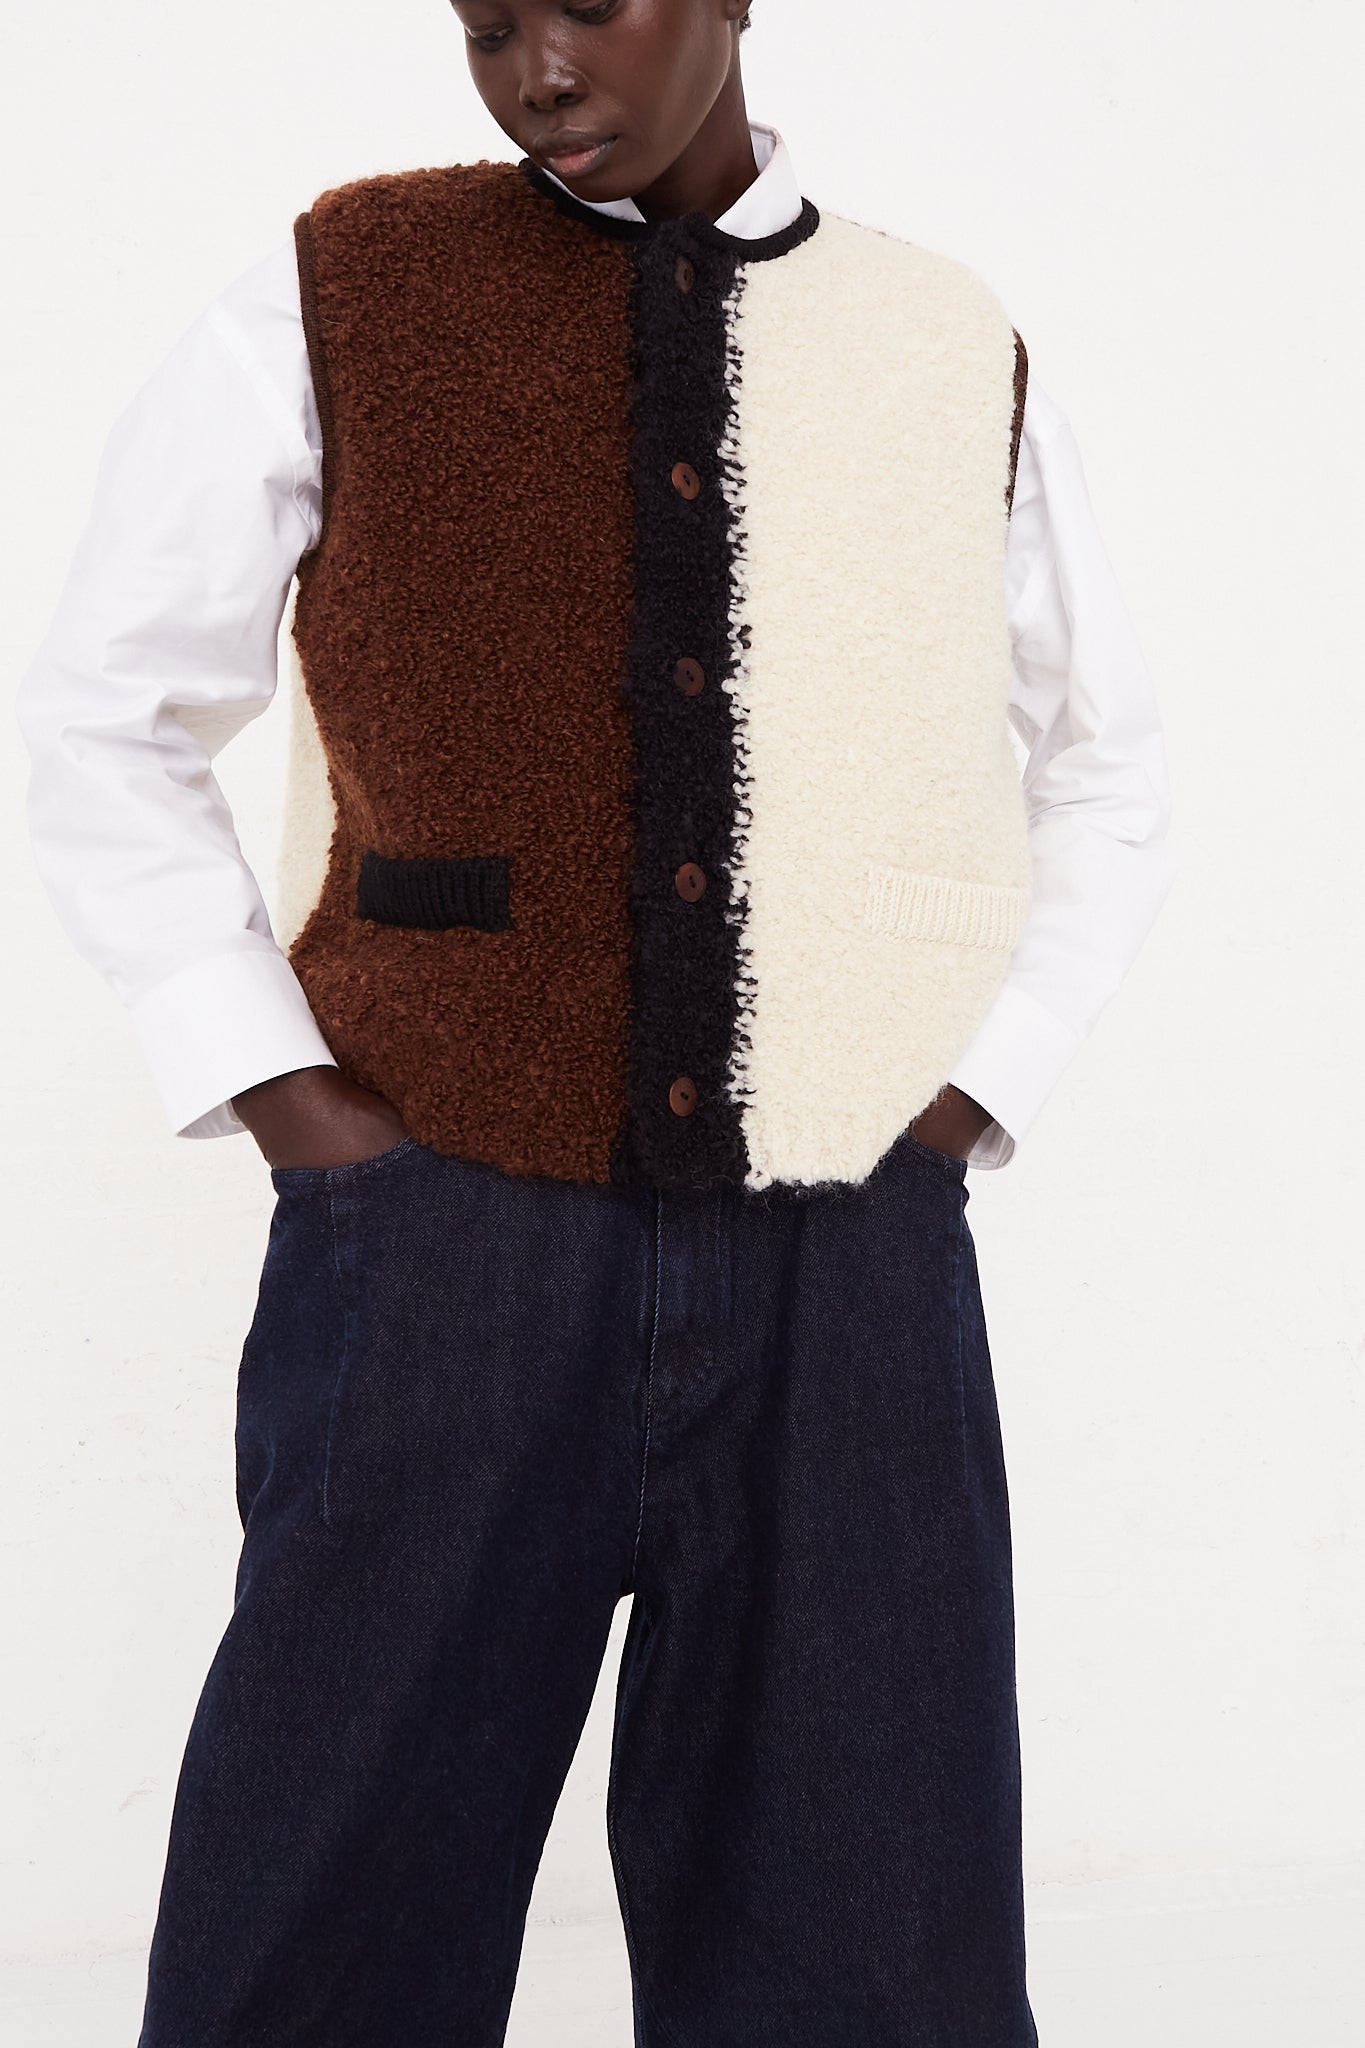 A model wearing a knit waistcoat in a wool and mohair blend. Features a front button closure, banded edges and color block detail. Designed by Cordera - Oroboro Store